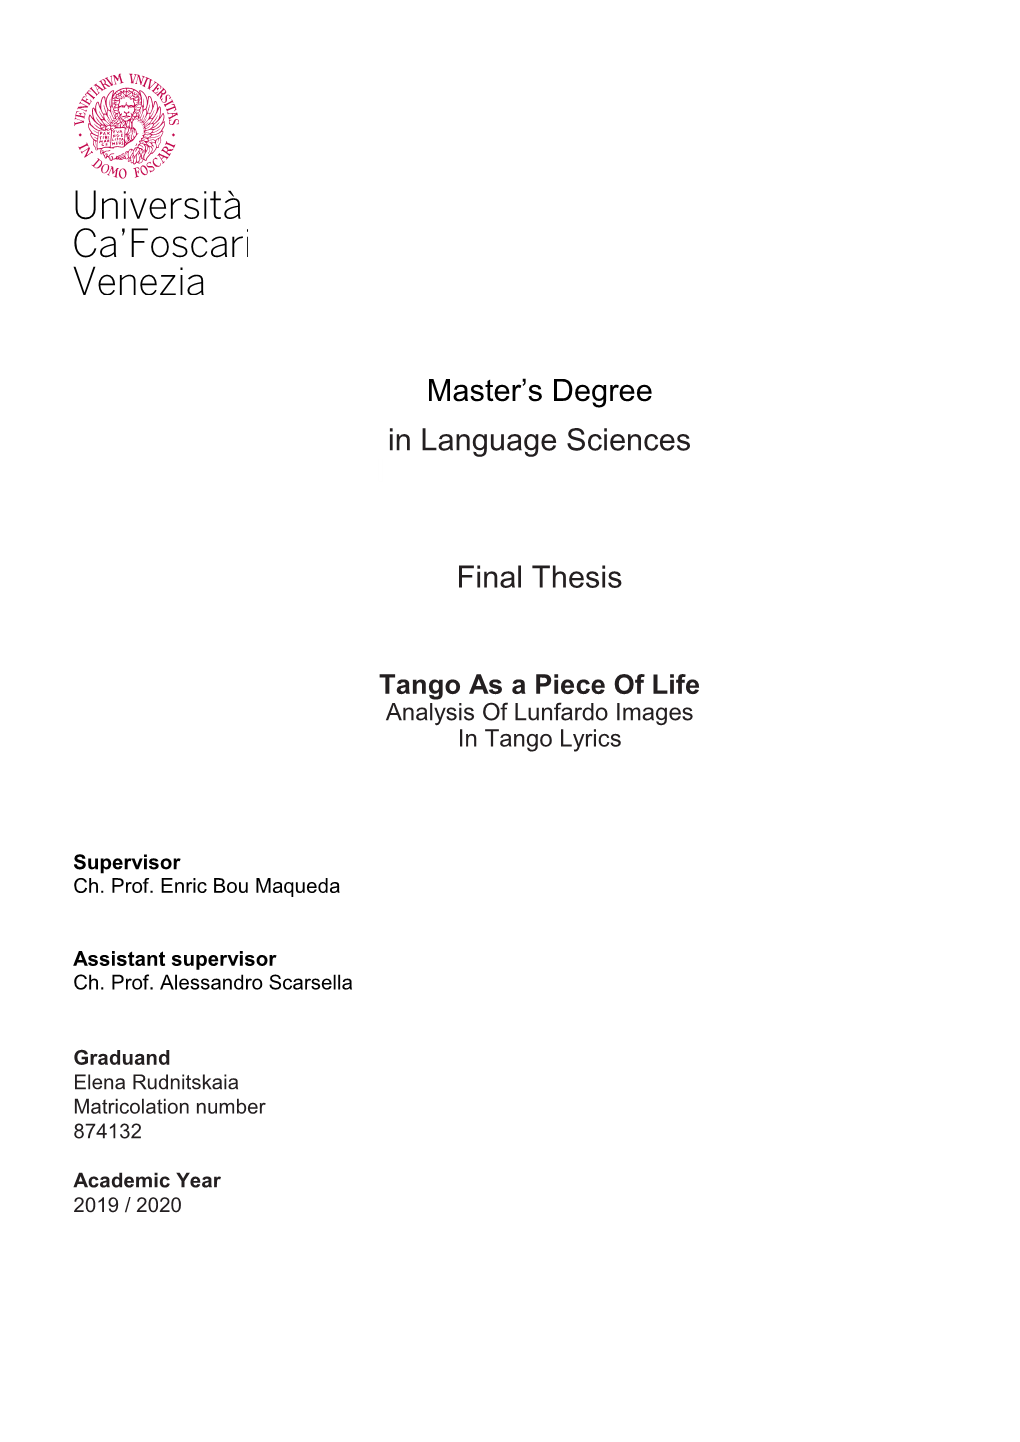 Master's Degree in Language Sciences Final Thesis